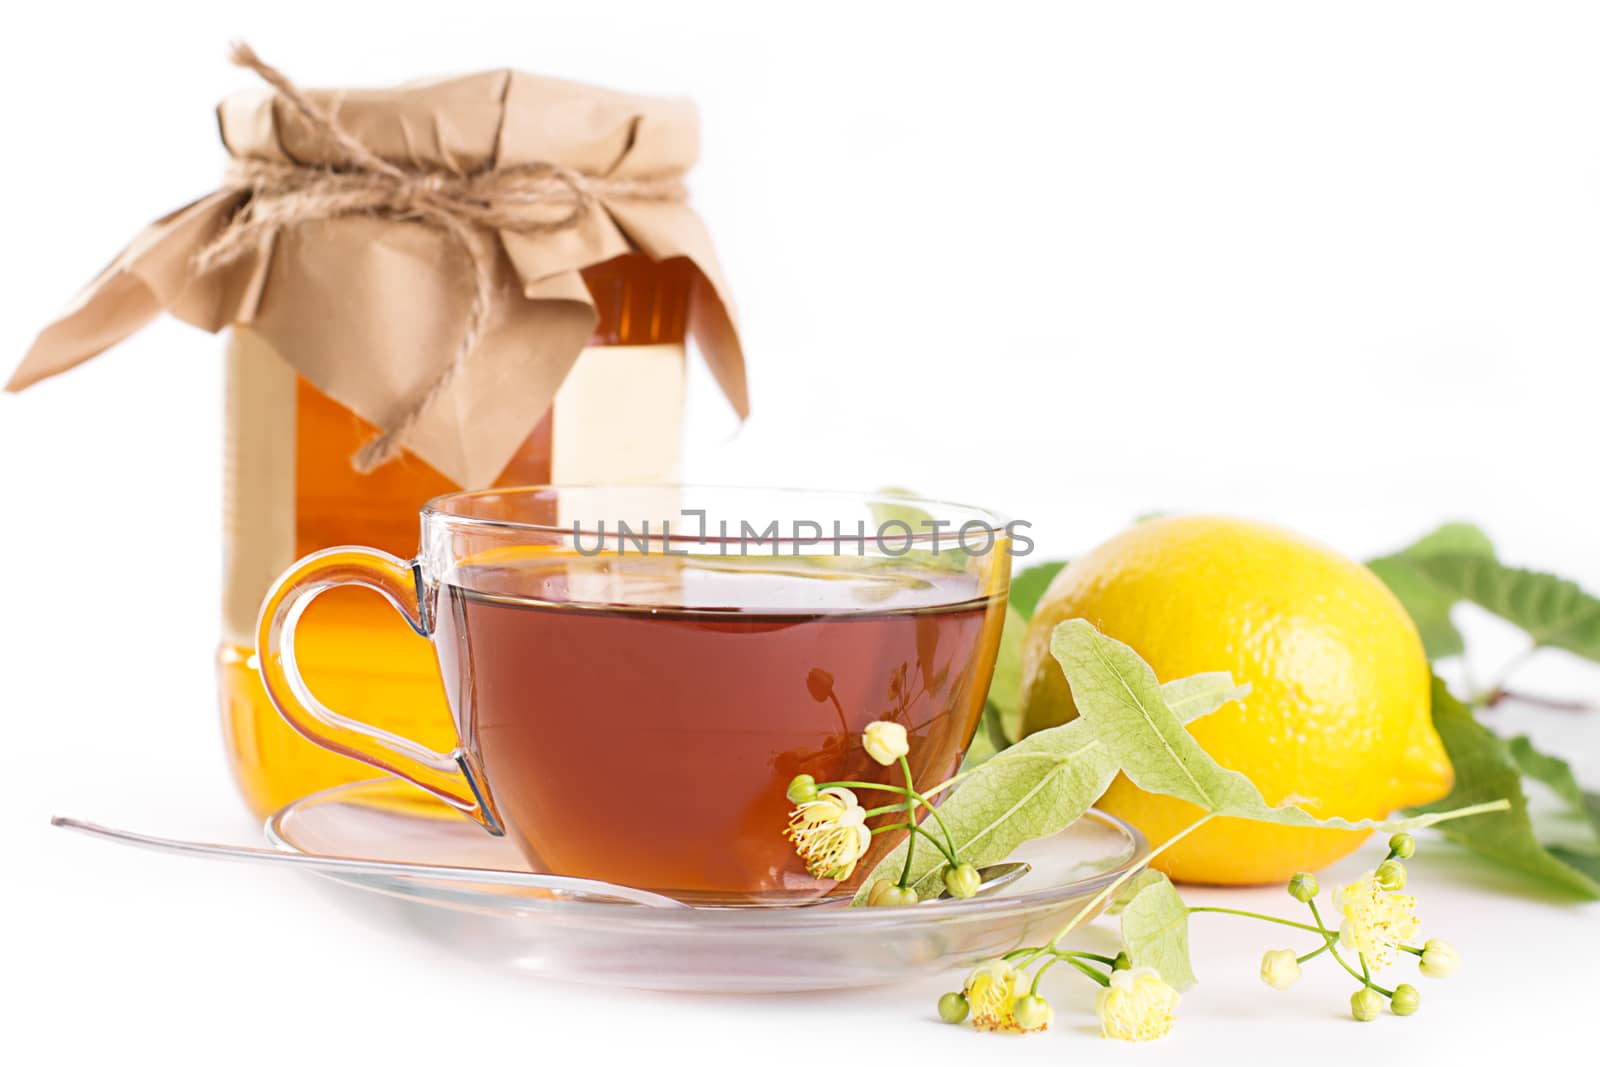 Lemon tea with linden honey jar and flowers by Angel_a